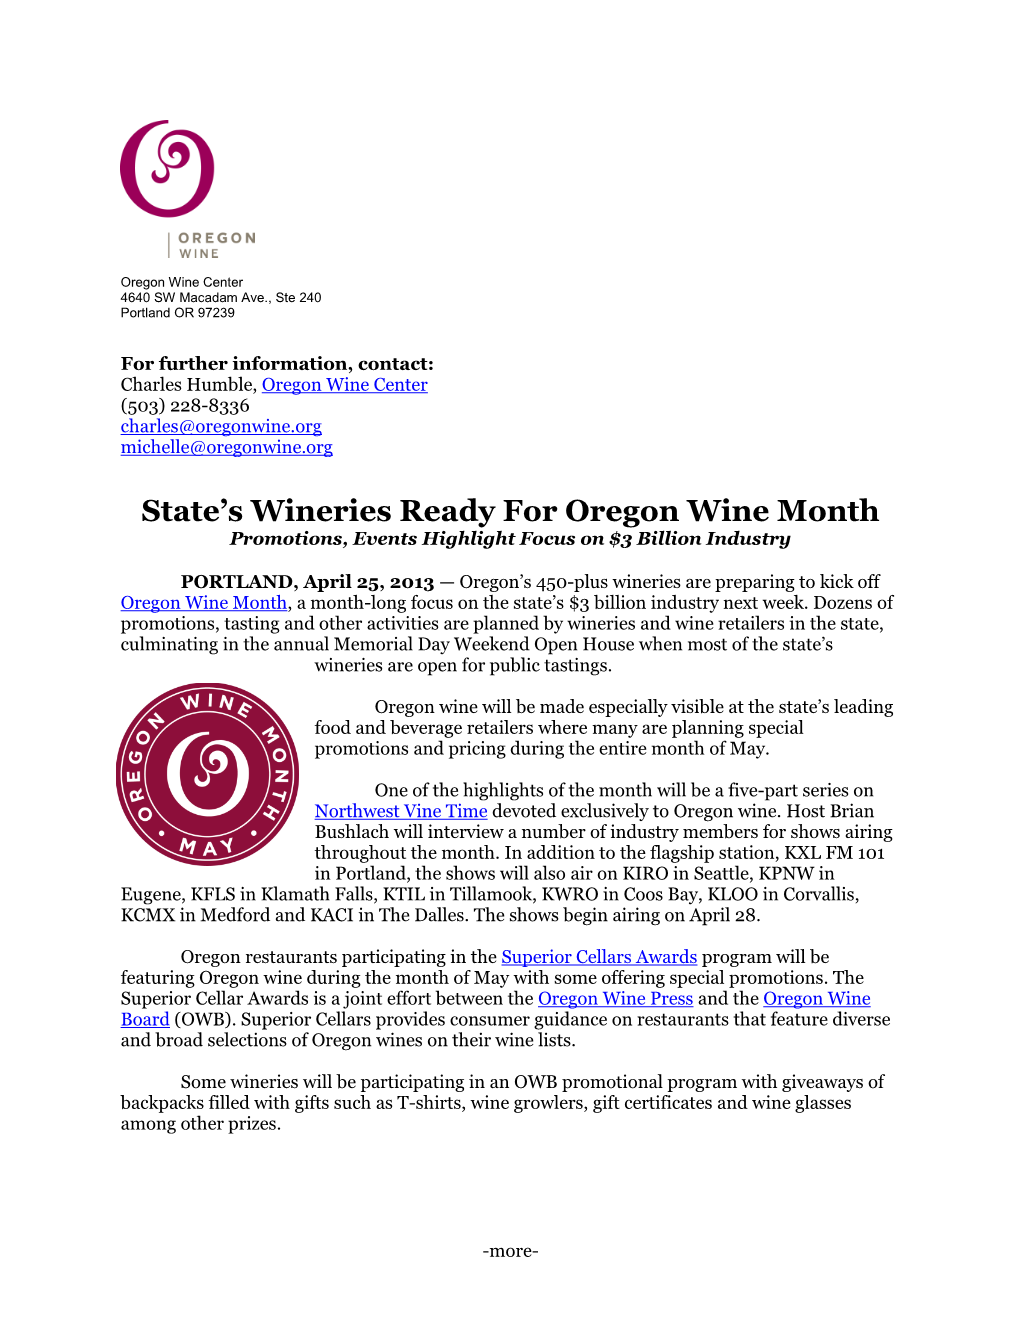 State's Wineries Ready for Oregon Wine Month